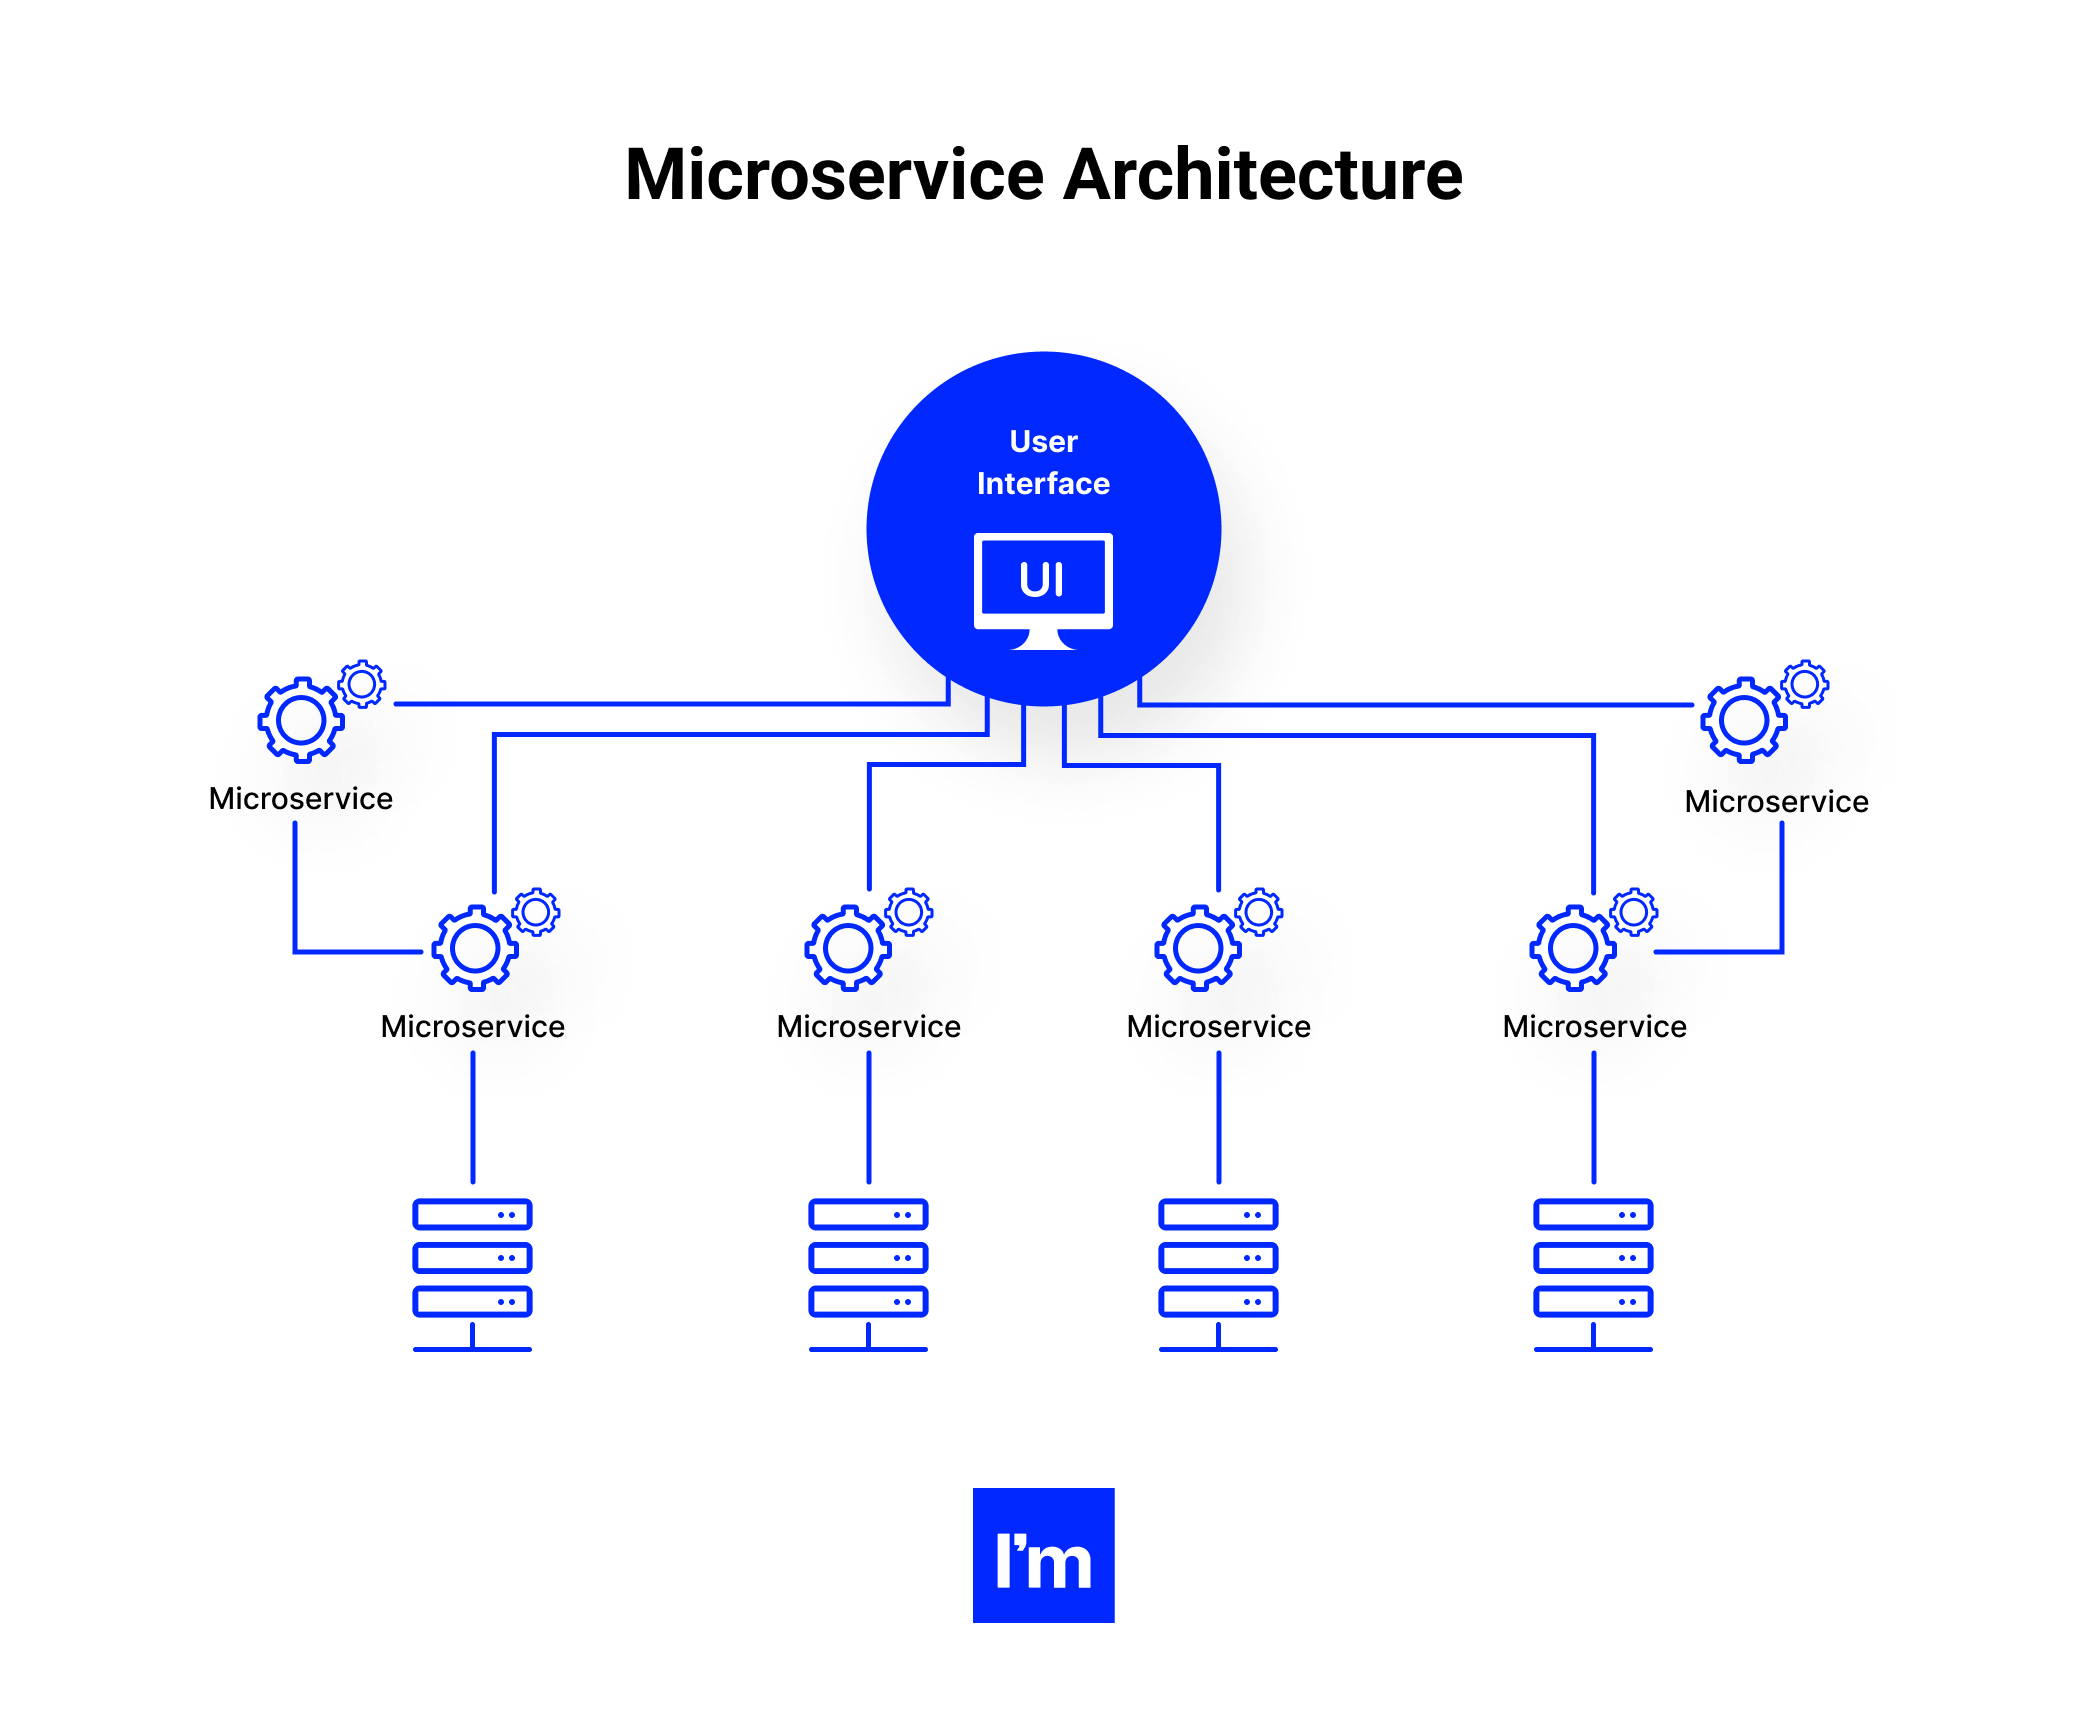 Building Microservices in C# - Microservice Architecture